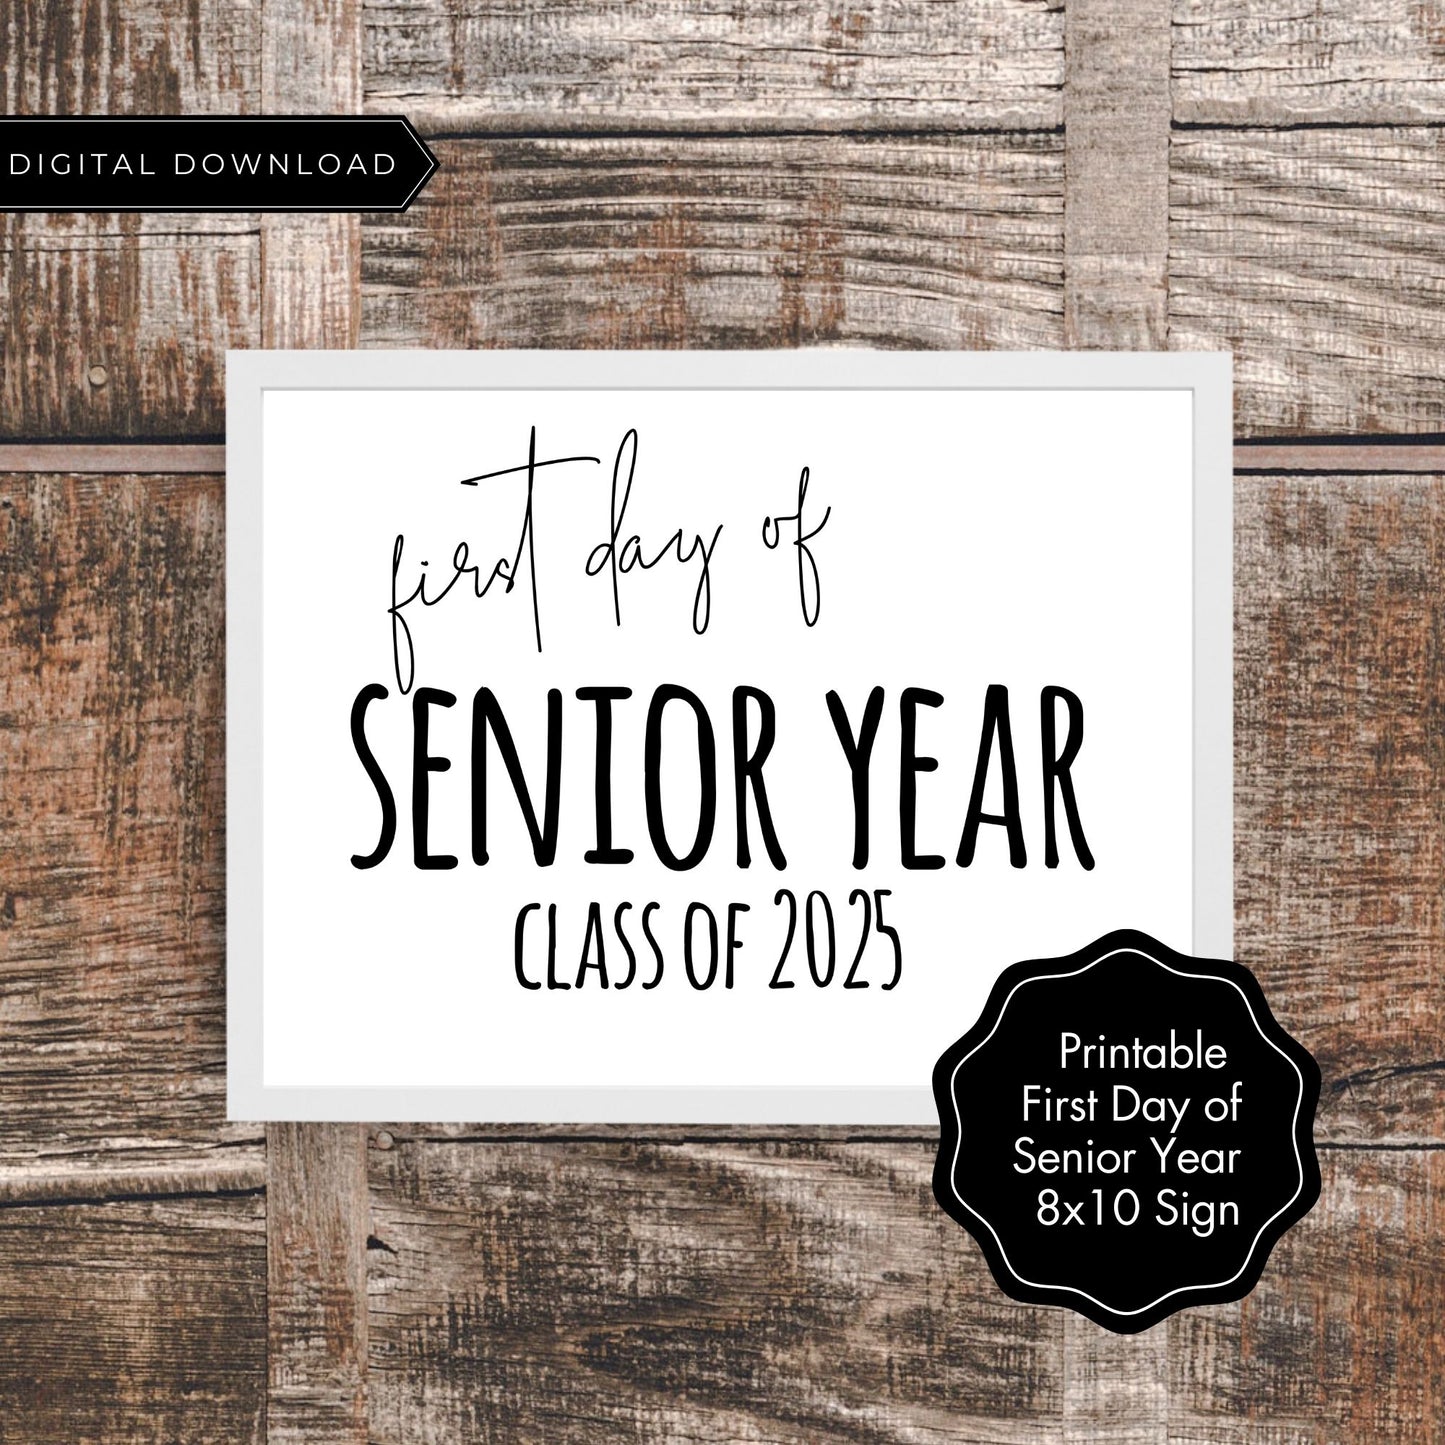 First Day of Senior Year Class of 2025 Printable Sign